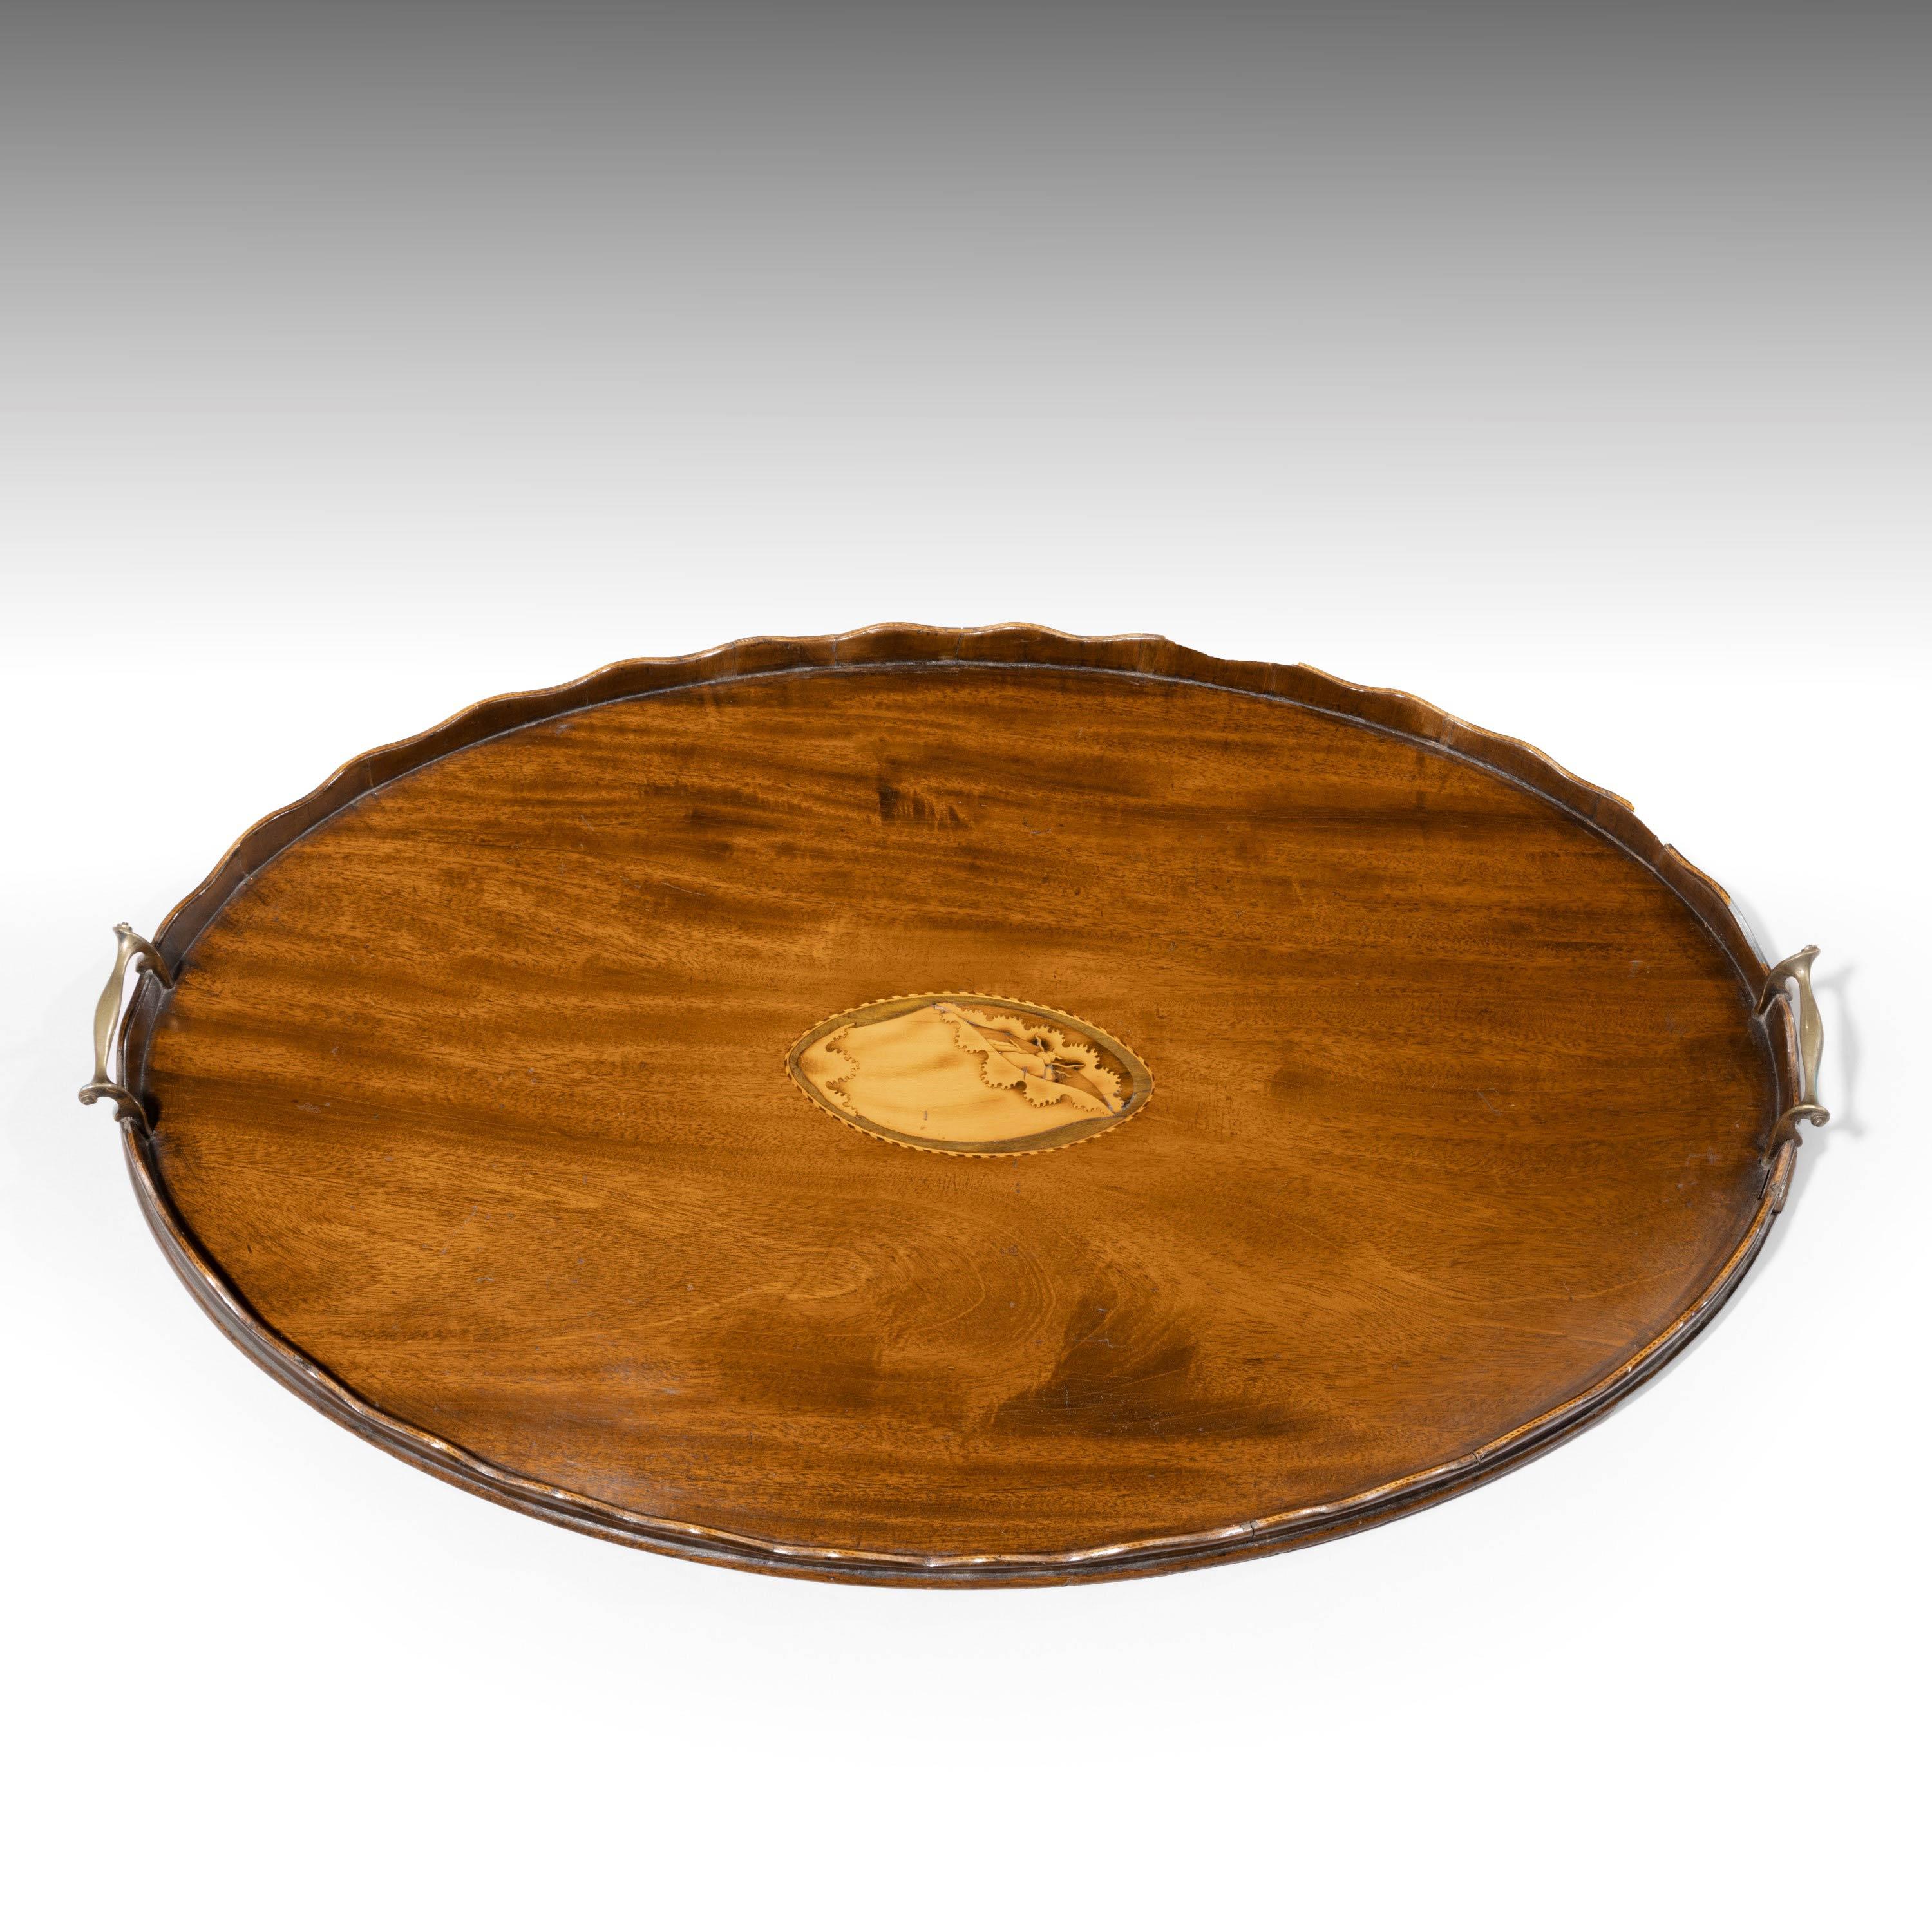 An attractive Edwardian mahogany oval tray. With the original gilt bronze handles and a wavy border. The centre with a fine inlaid marquetry shell.
  